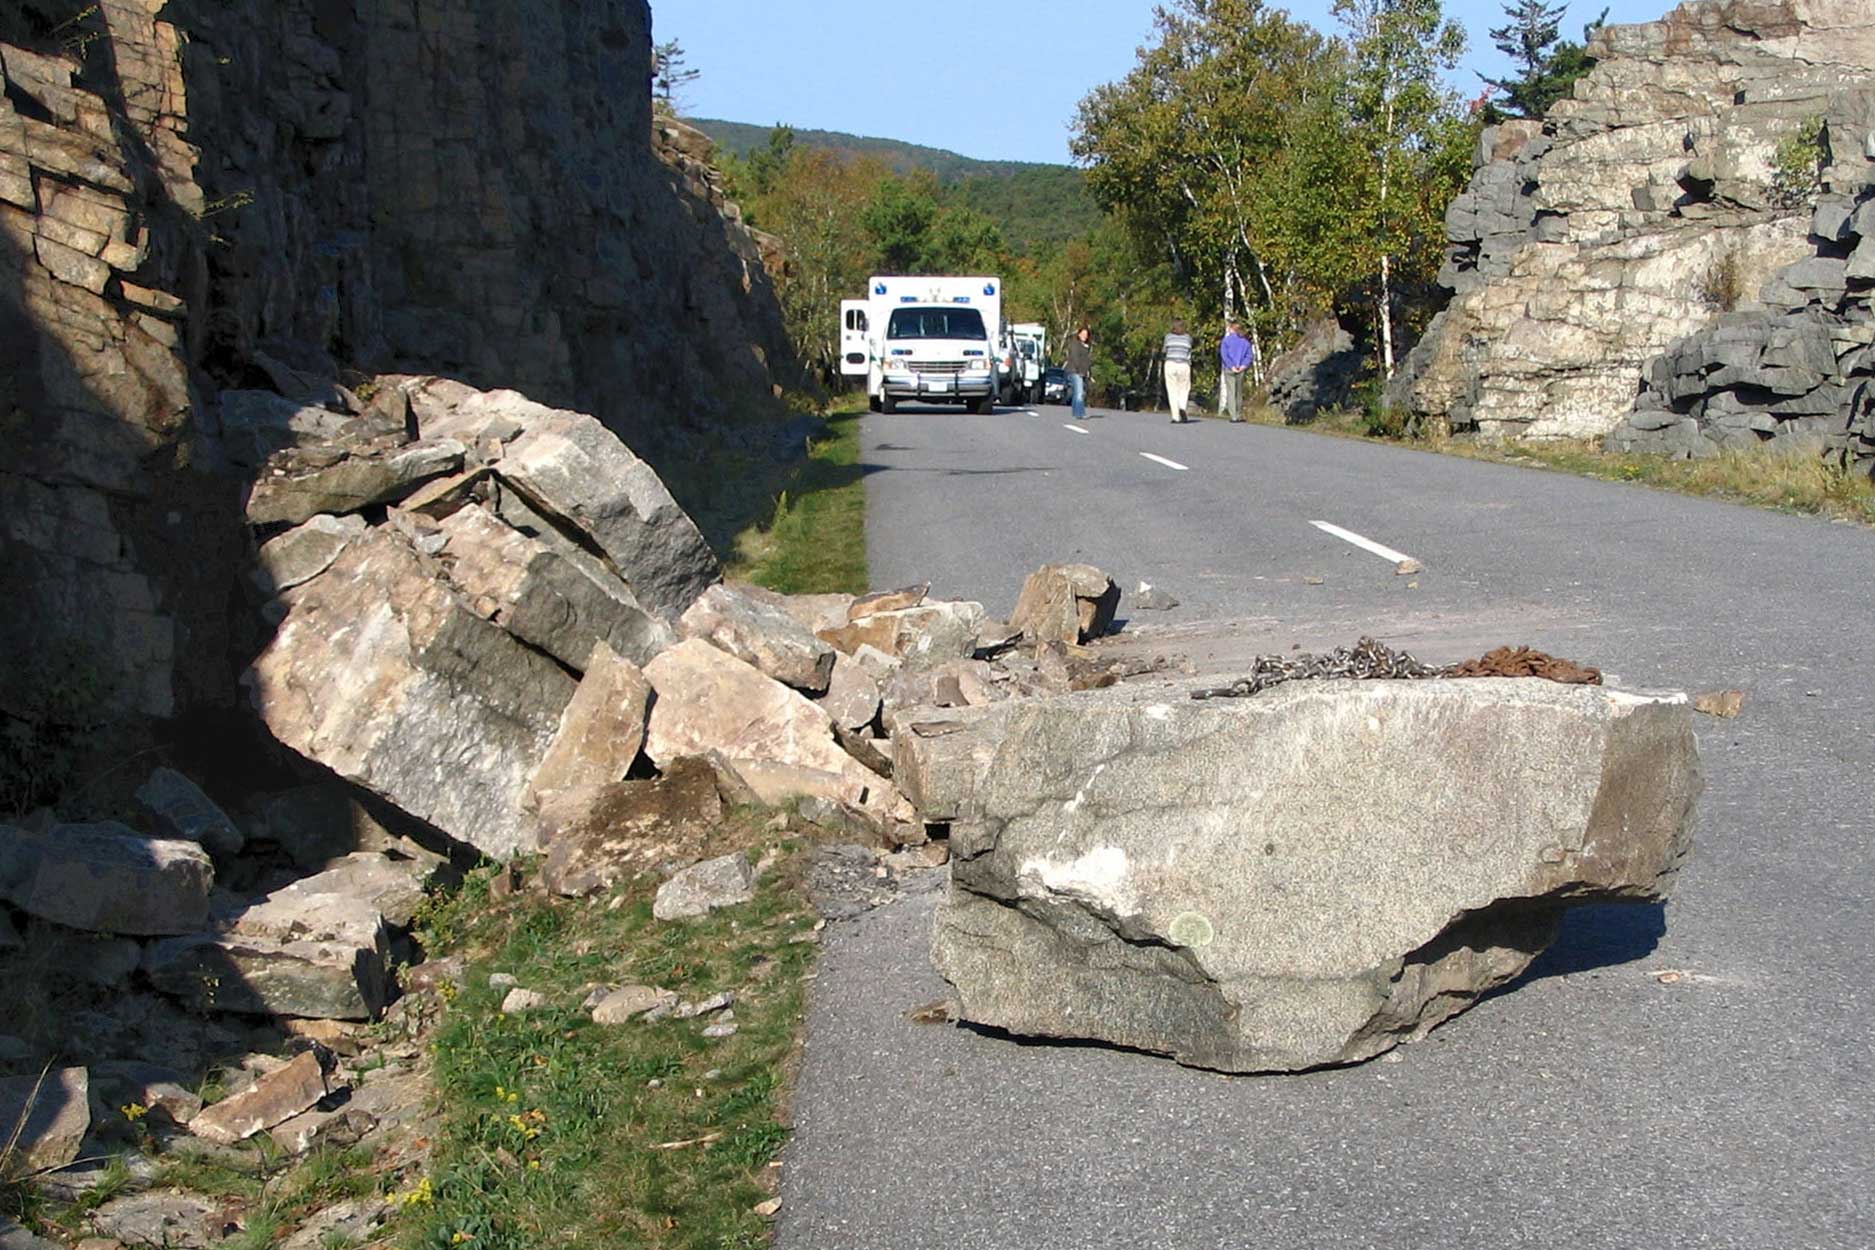 Photograph of a rockfall at Acadia National Park in Maine. The photo shows rocks that have fallen into one lane of a two-lane paved road.